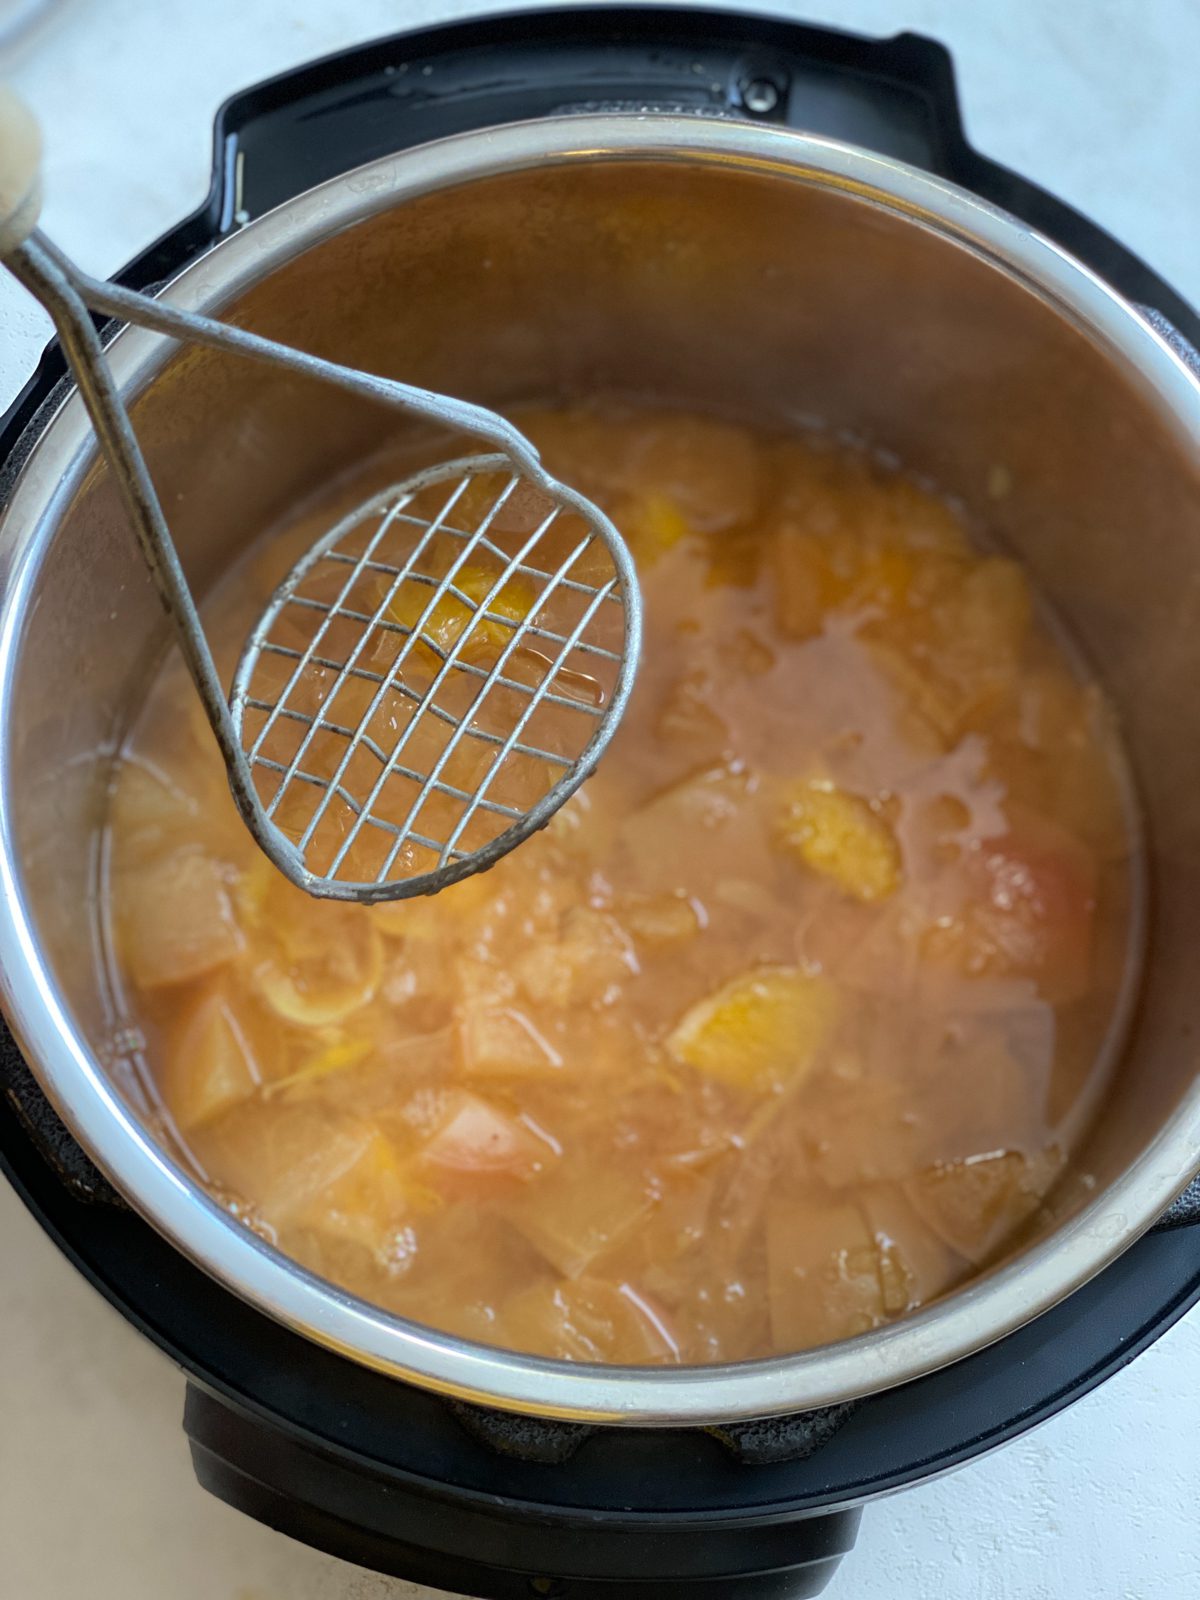 process of using potato masher on instant pot ingredients